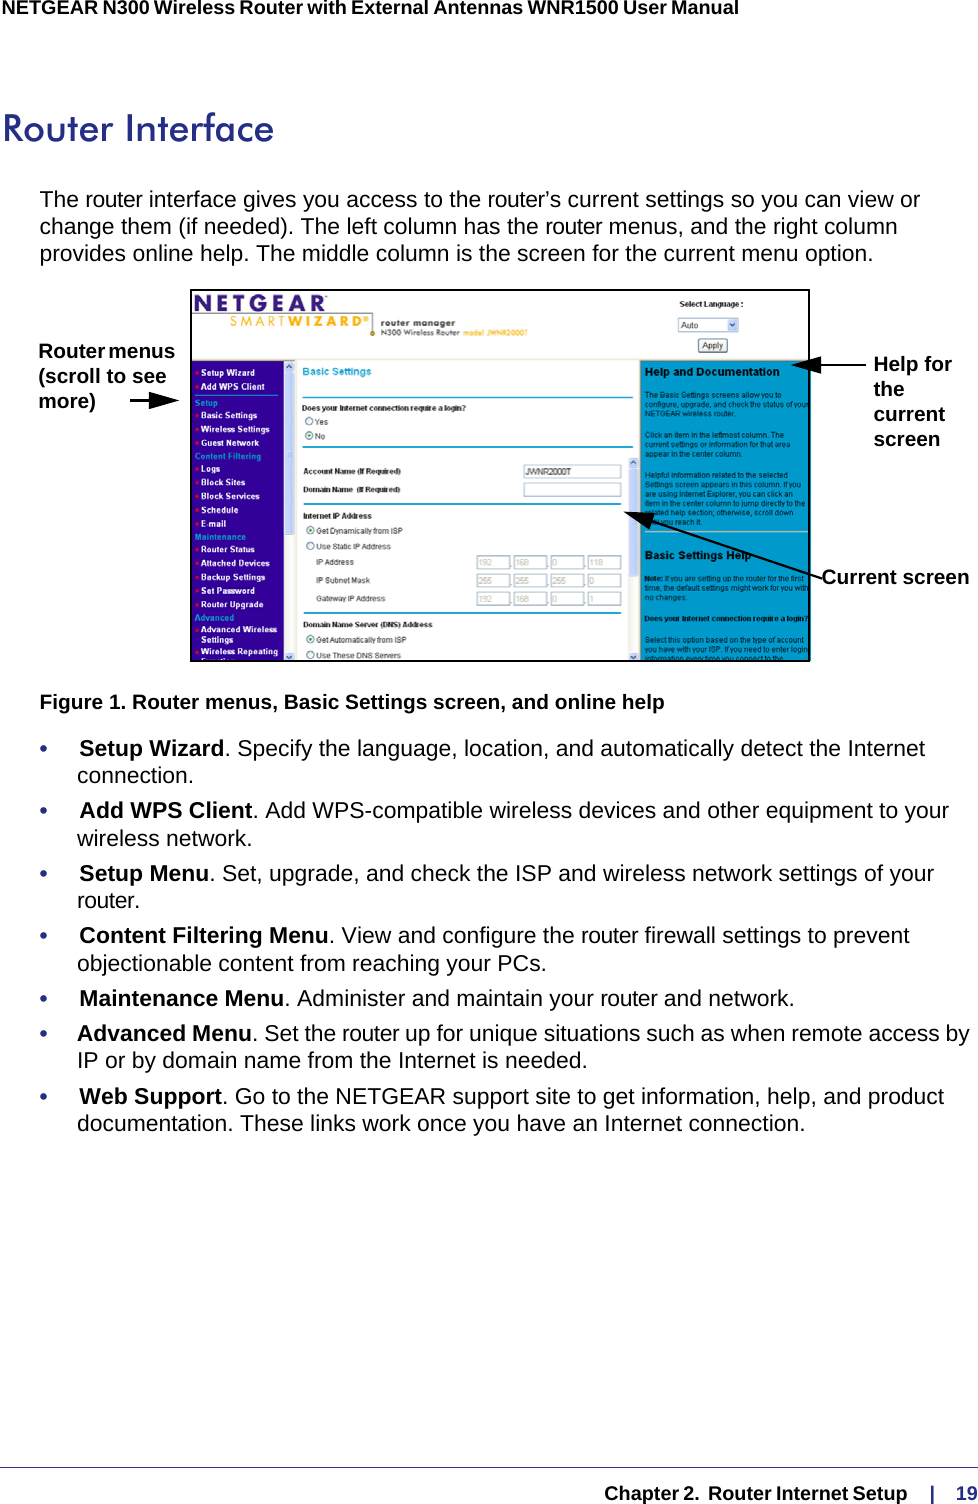   Chapter 2.  Router Internet Setup     |    19NETGEAR N300 Wireless Router with External Antennas WNR1500 User Manual Router InterfaceThe router interface gives you access to the router’s current settings so you can view or change them (if needed). The left column has the router menus, and the right column provides online help. The middle column is the screen for the current menu option.Router menus (scroll to see more)Help for the current screenCurrent screenFigure 1. Router menus, Basic Settings screen, and online help•     Setup Wizard. Specify the language, location, and automatically detect the Internet connection. •     Add WPS Client. Add WPS-compatible wireless devices and other equipment to your wireless network. •     Setup Menu. Set, upgrade, and check the ISP and wireless network settings of your router. •     Content Filtering Menu. View and configure the router firewall settings to prevent objectionable content from reaching your PCs.•     Maintenance Menu. Administer and maintain your router and network. •     Advanced Menu. Set the router up for unique situations such as when remote access by IP or by domain name from the Internet is needed. •     Web Support. Go to the NETGEAR support site to get information, help, and product documentation. These links work once you have an Internet connection.